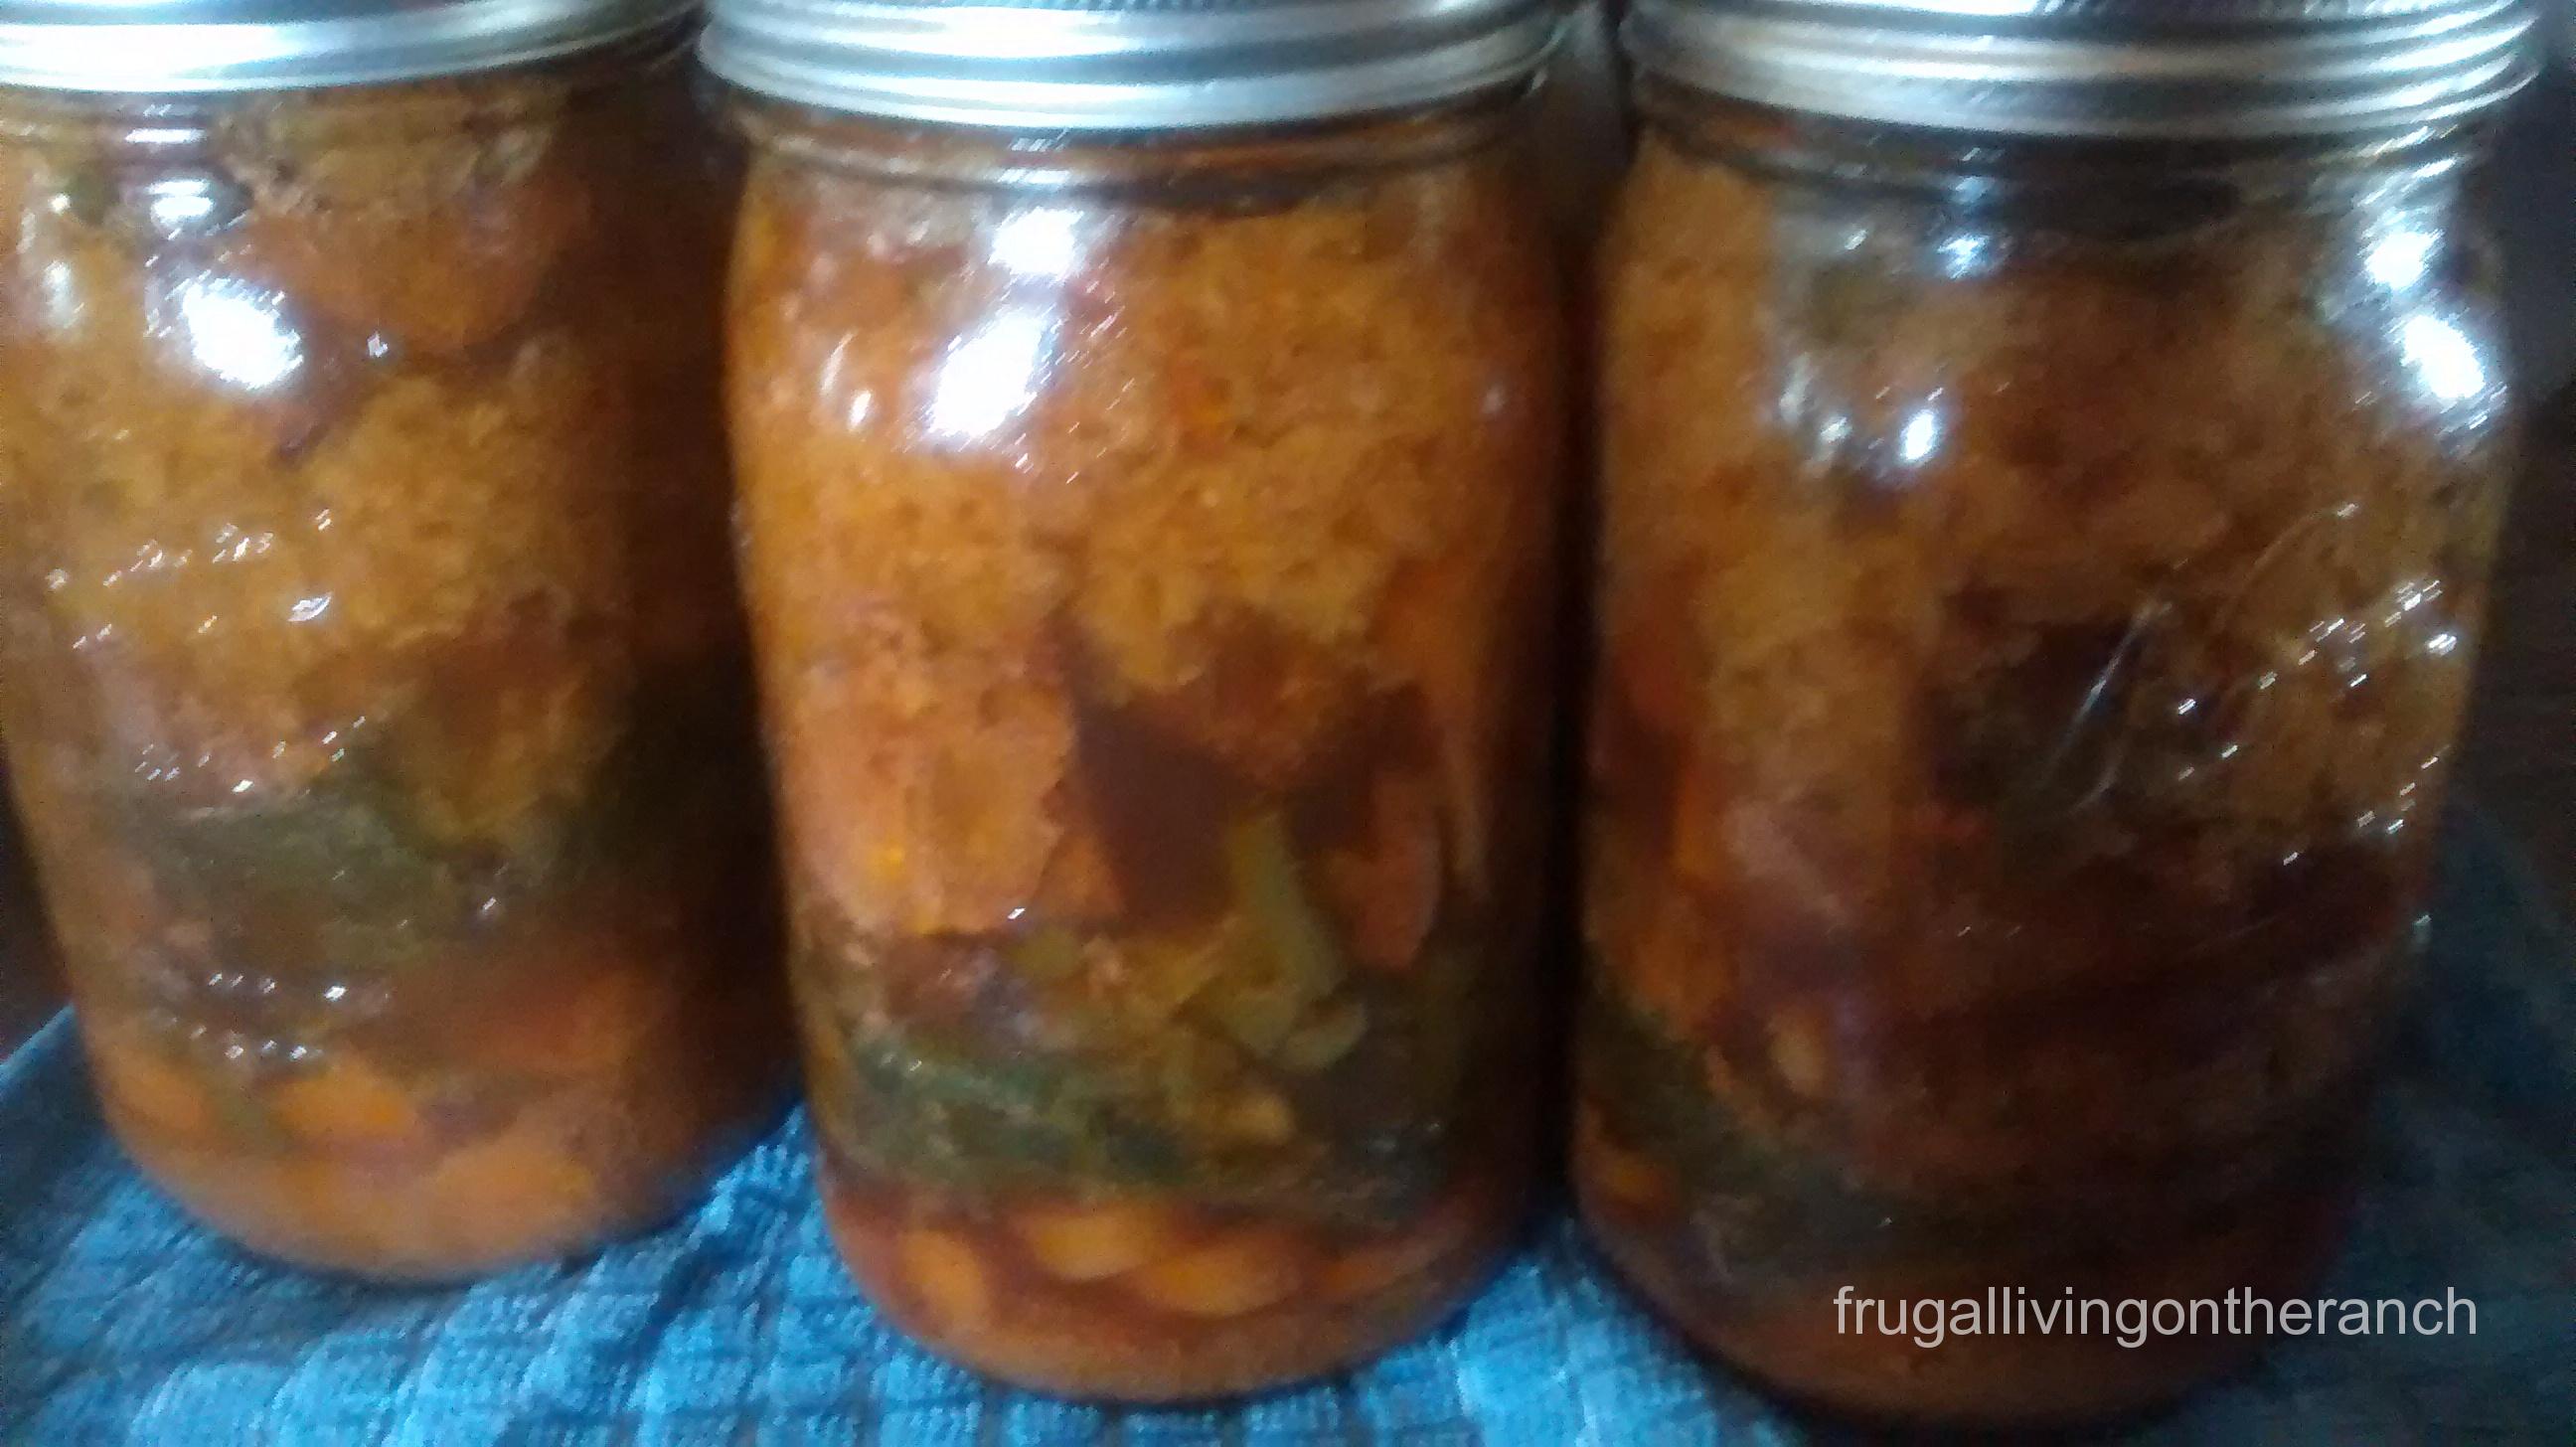 Canning your own Dog Food - Frugal Living on the Ranch